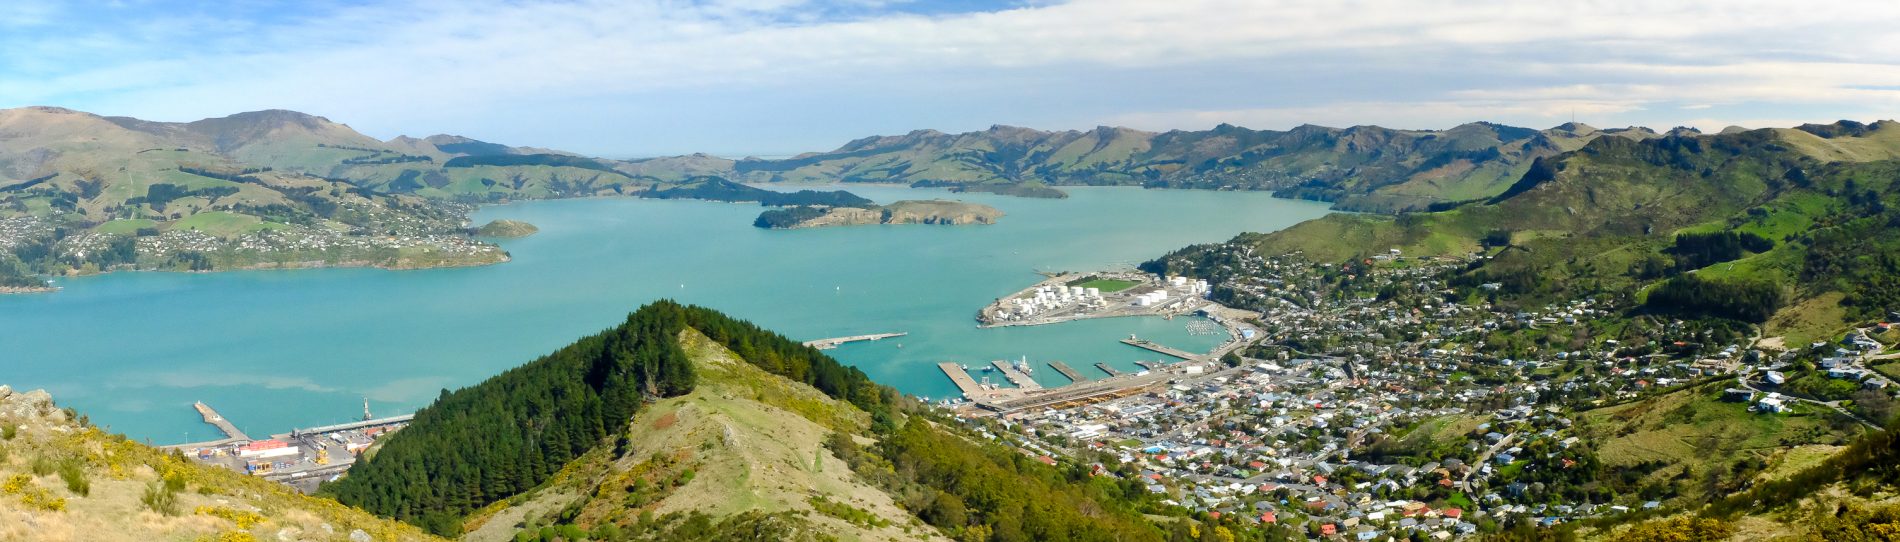 Lyttelton Town and Harbour christchurch team trips